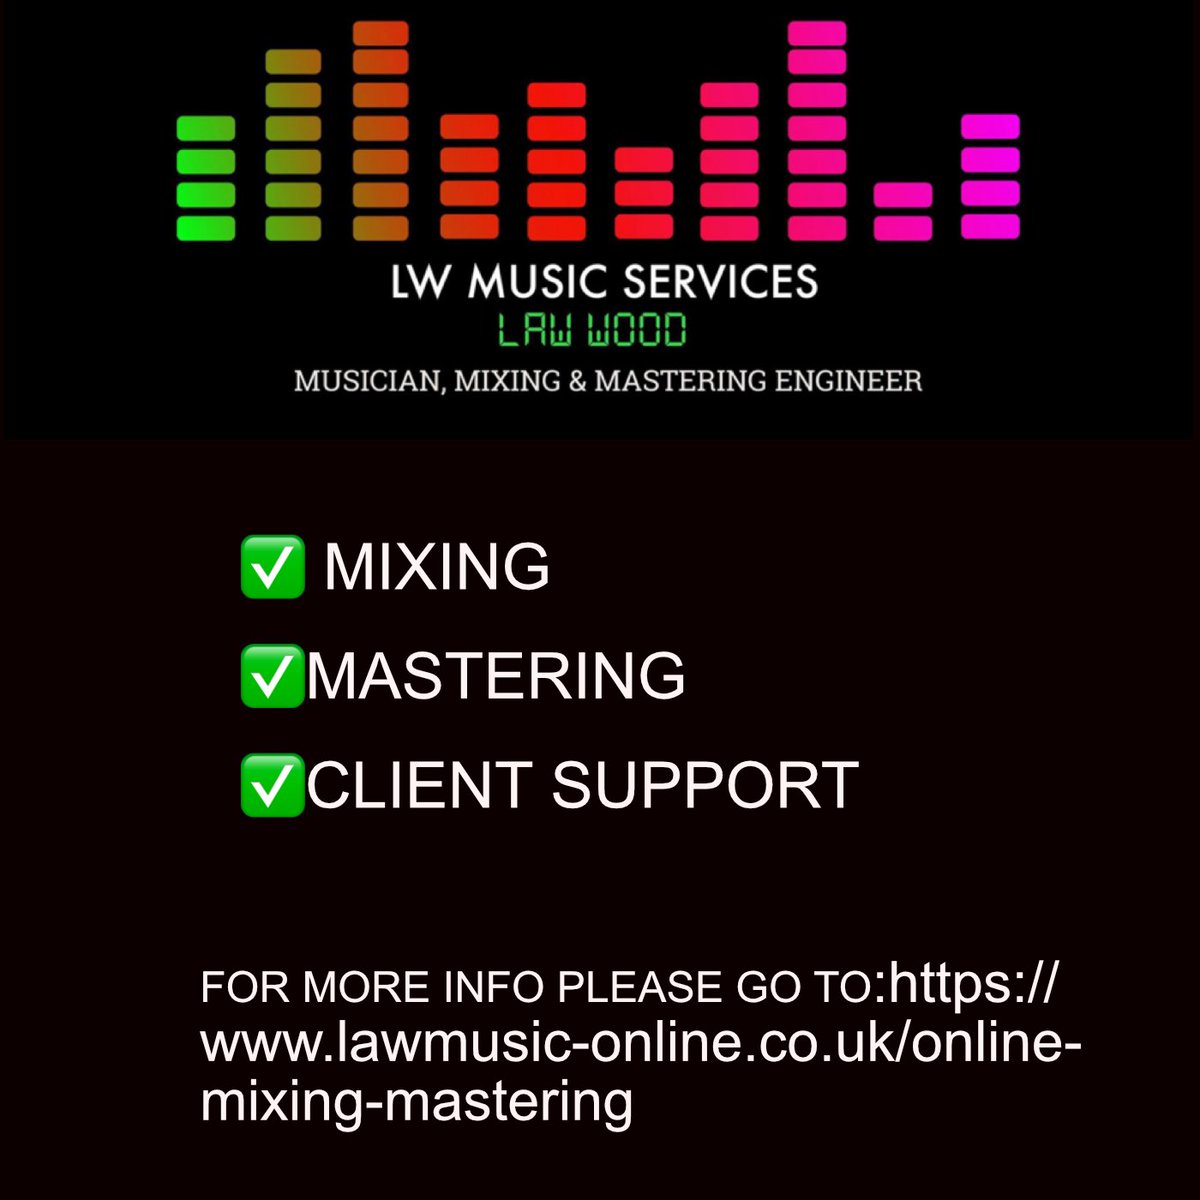 LW Music Services can help you take your music to the next level. Contact me for more info lawmusic-online.co.uk/lw-music-servi… Feel free to contact me for more info #mixing #mastering  #audiomixing